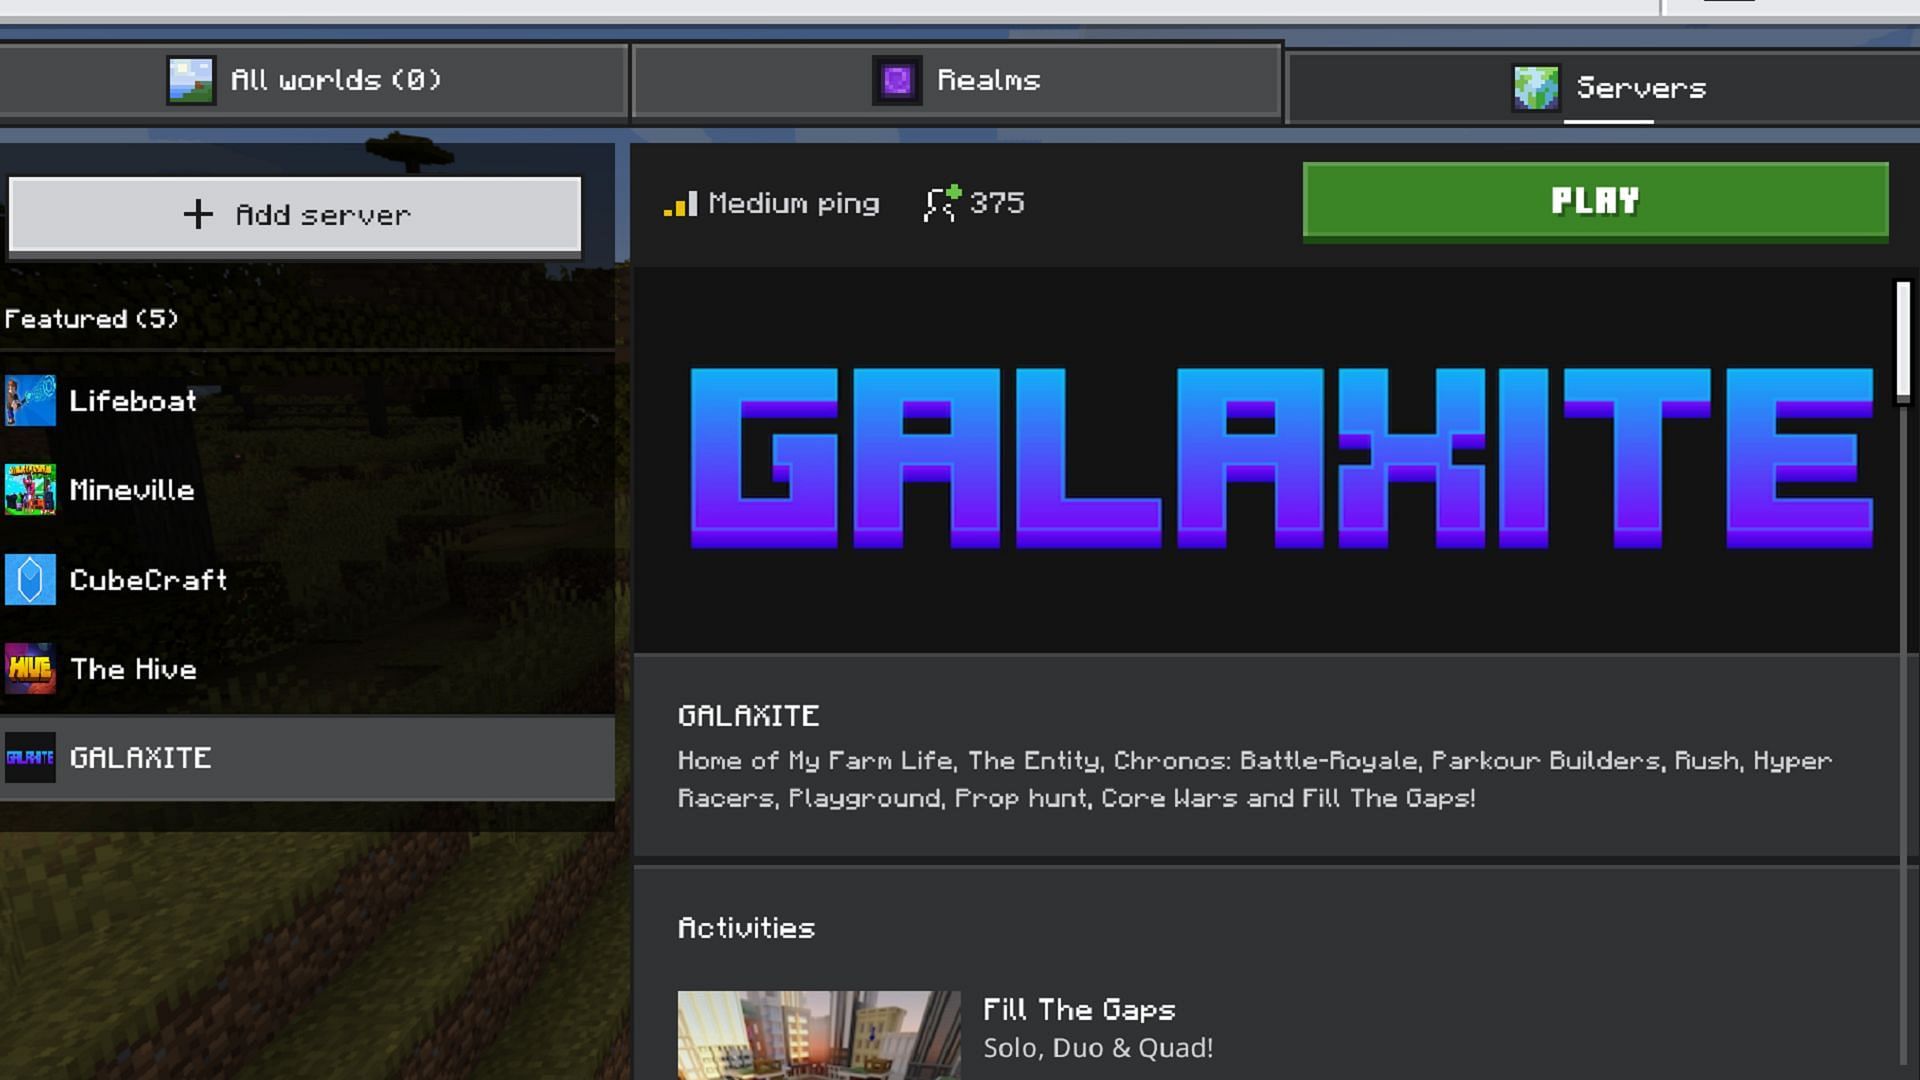 This Minecraft preview&#039;s new server browser UI includes featured game servers. (Image via Mojang)